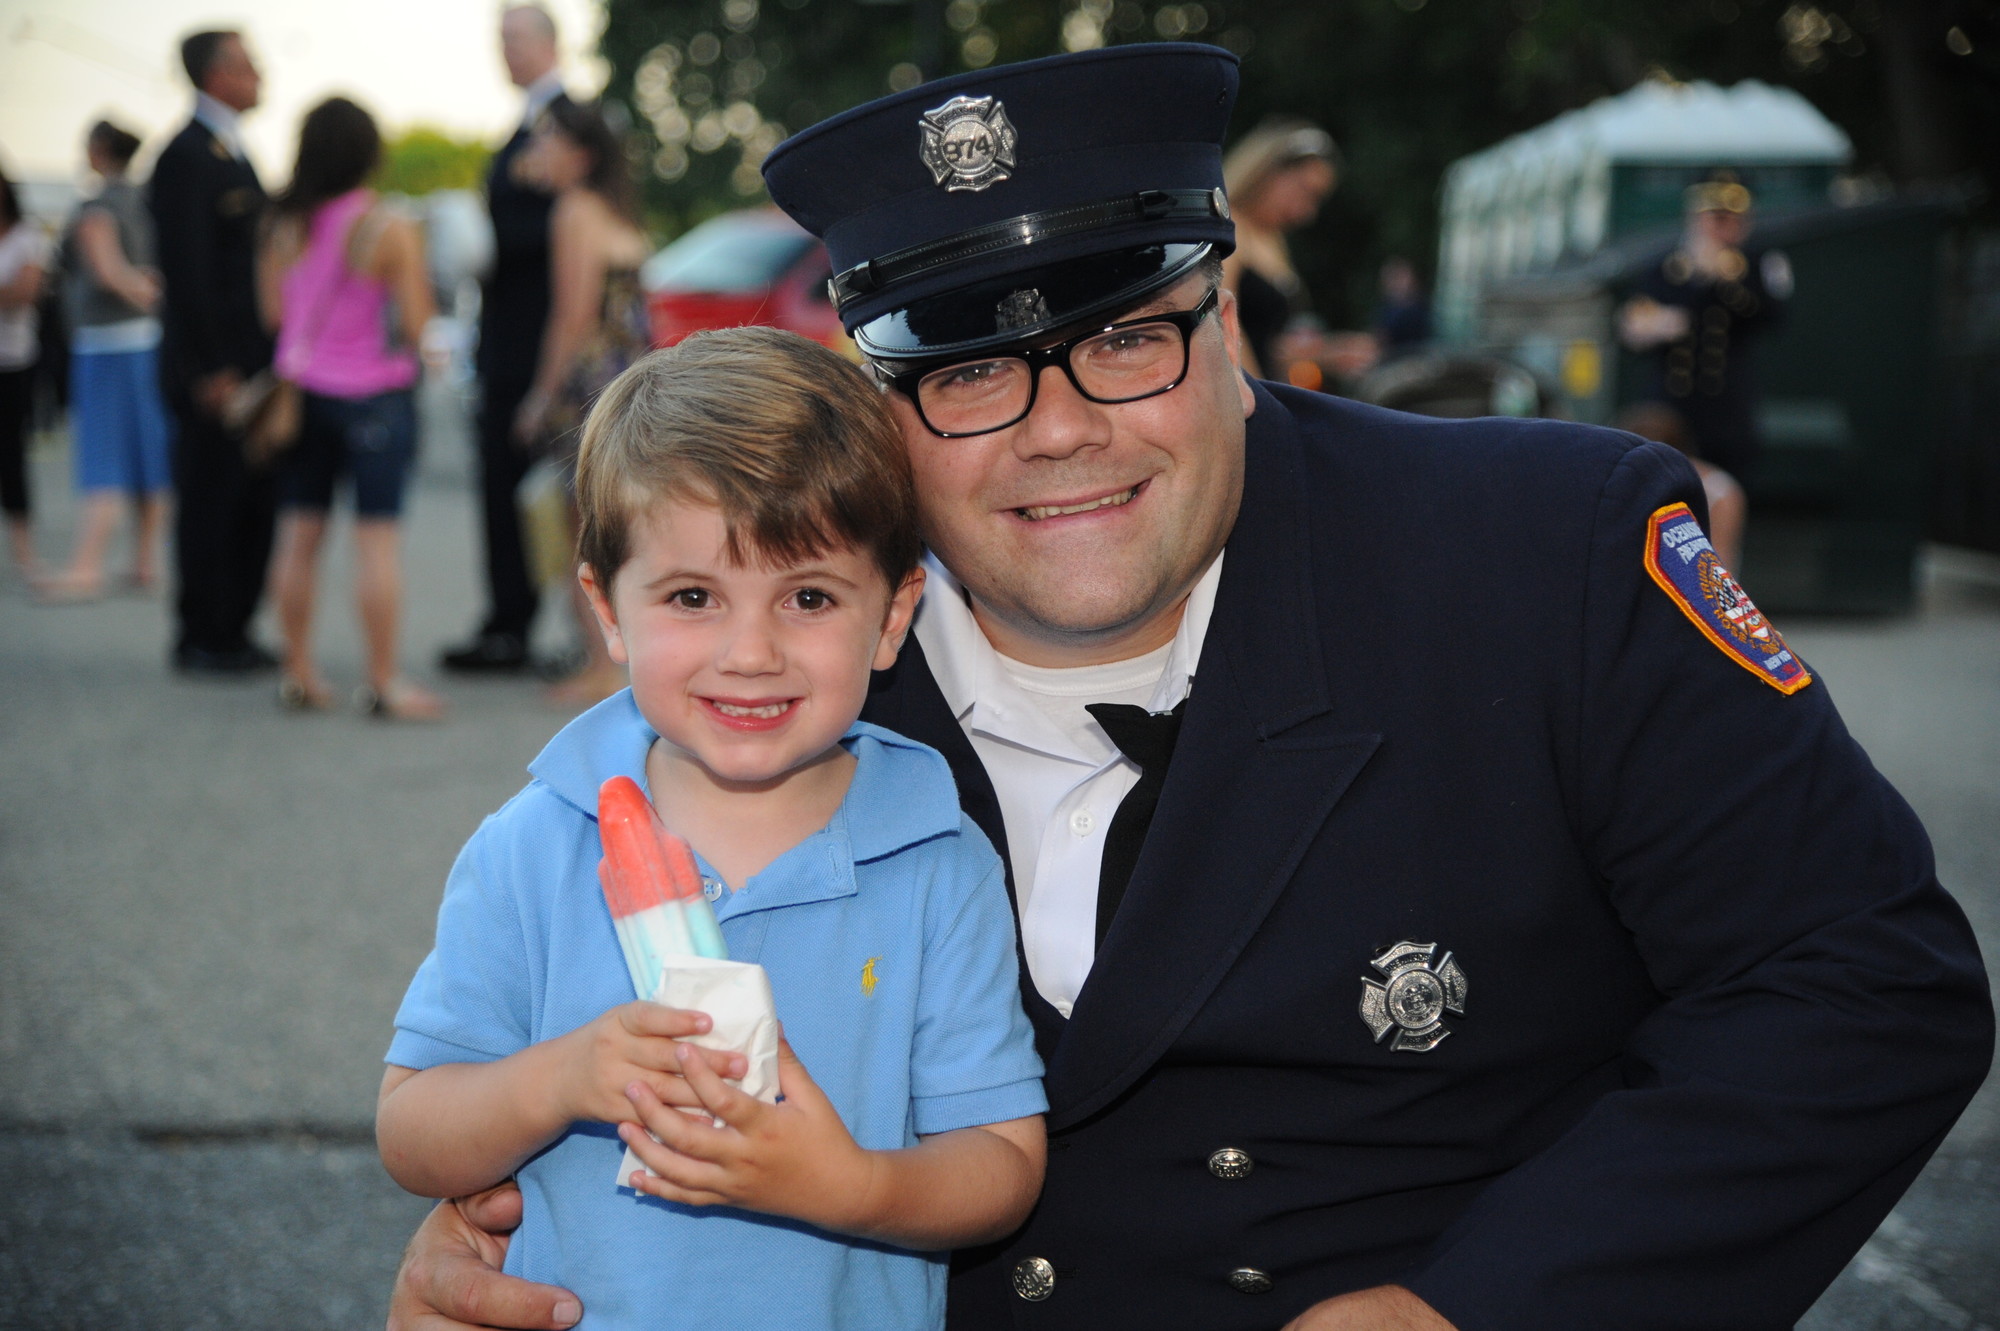 Sean Wayne, of the Oceaniside Fire Department, with his son, Gavin, 3.